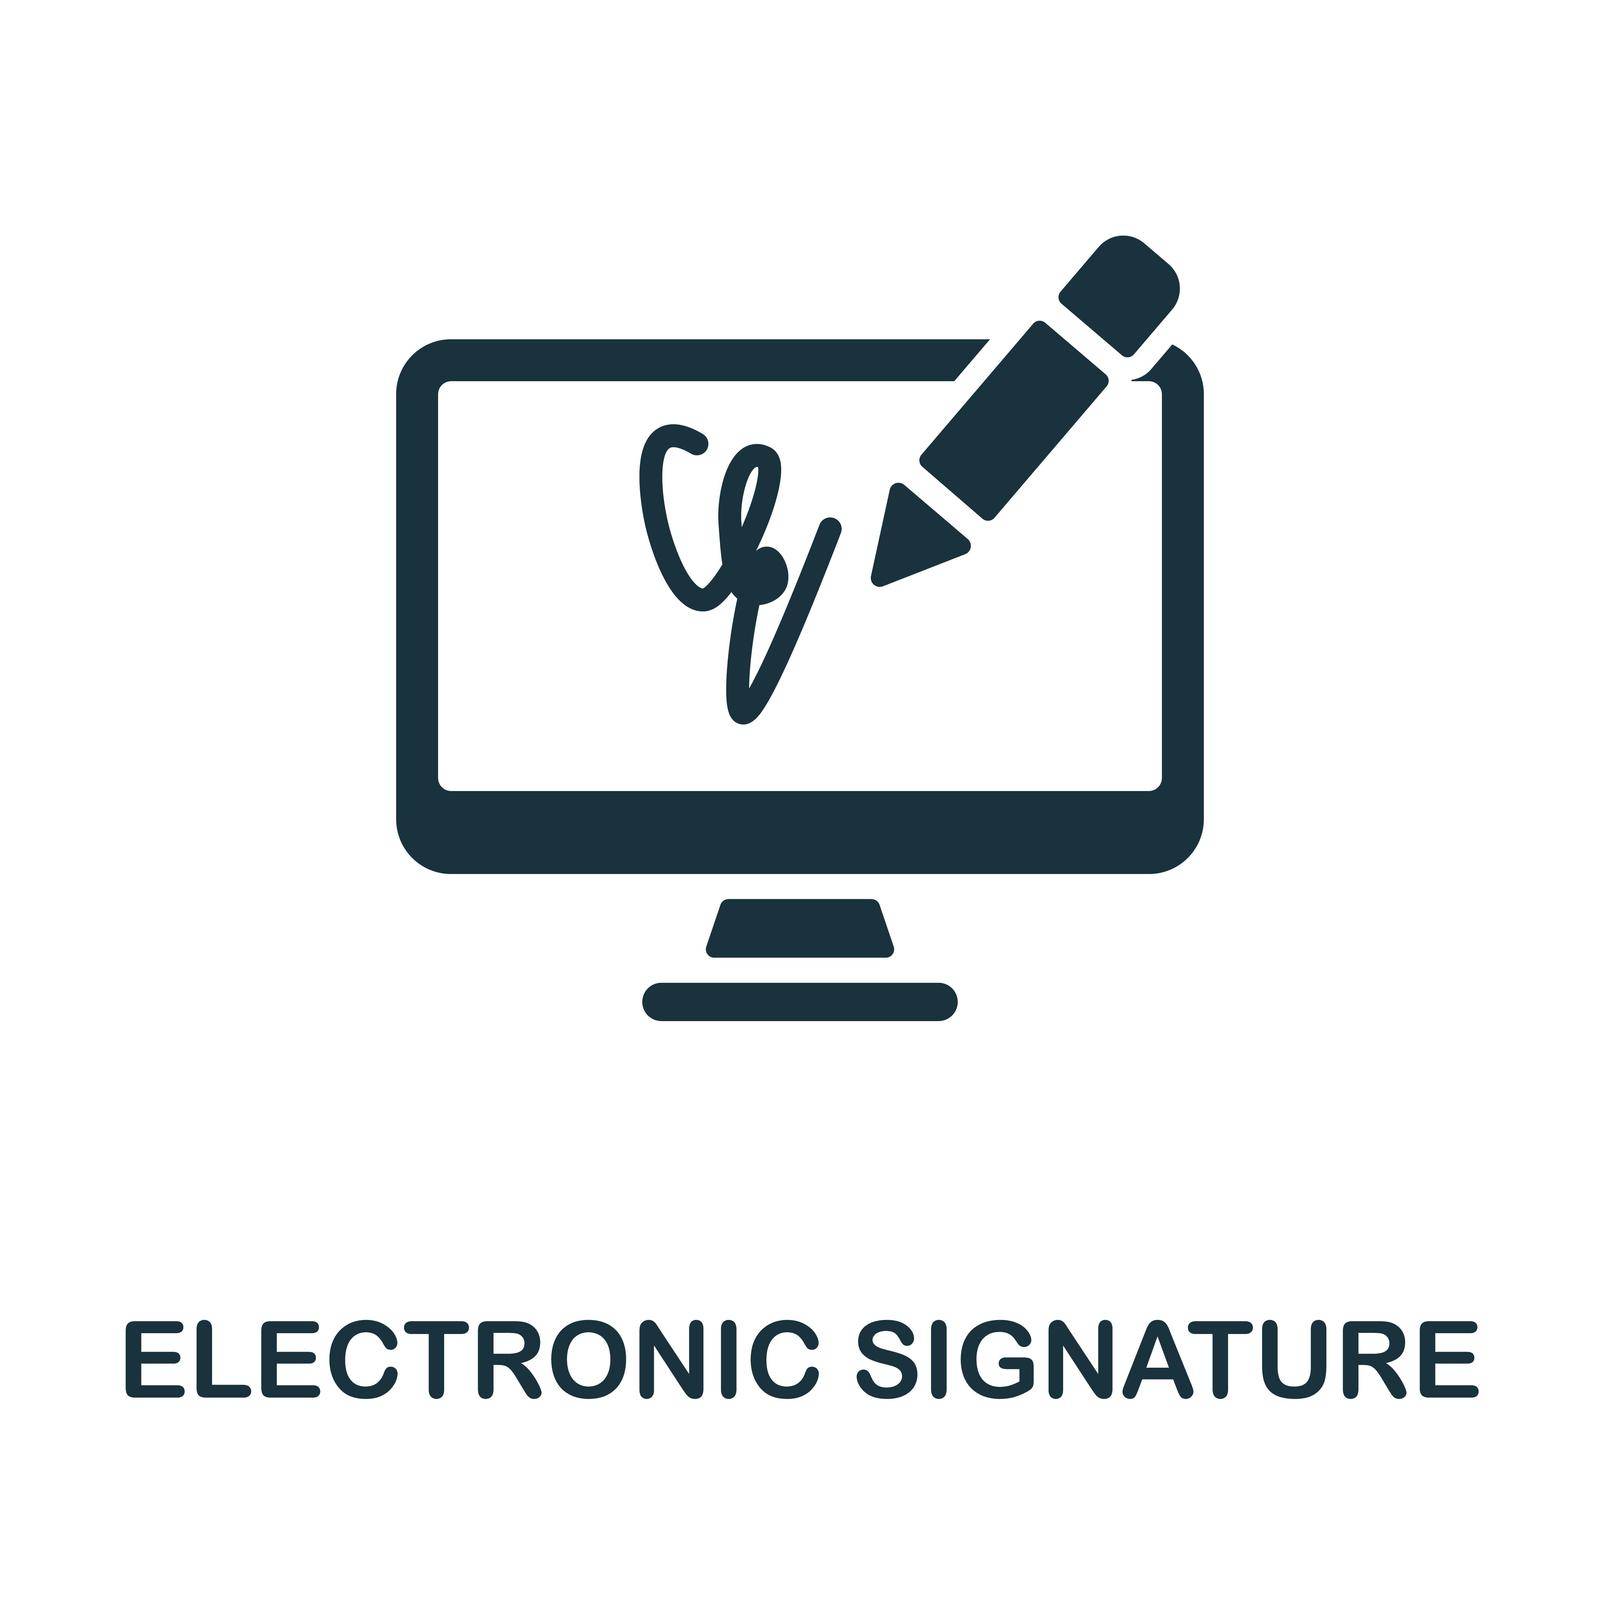 Electronic Signature icon. Monochrome simple Electronic Signature icon for templates, web design and infographics by simakovavector